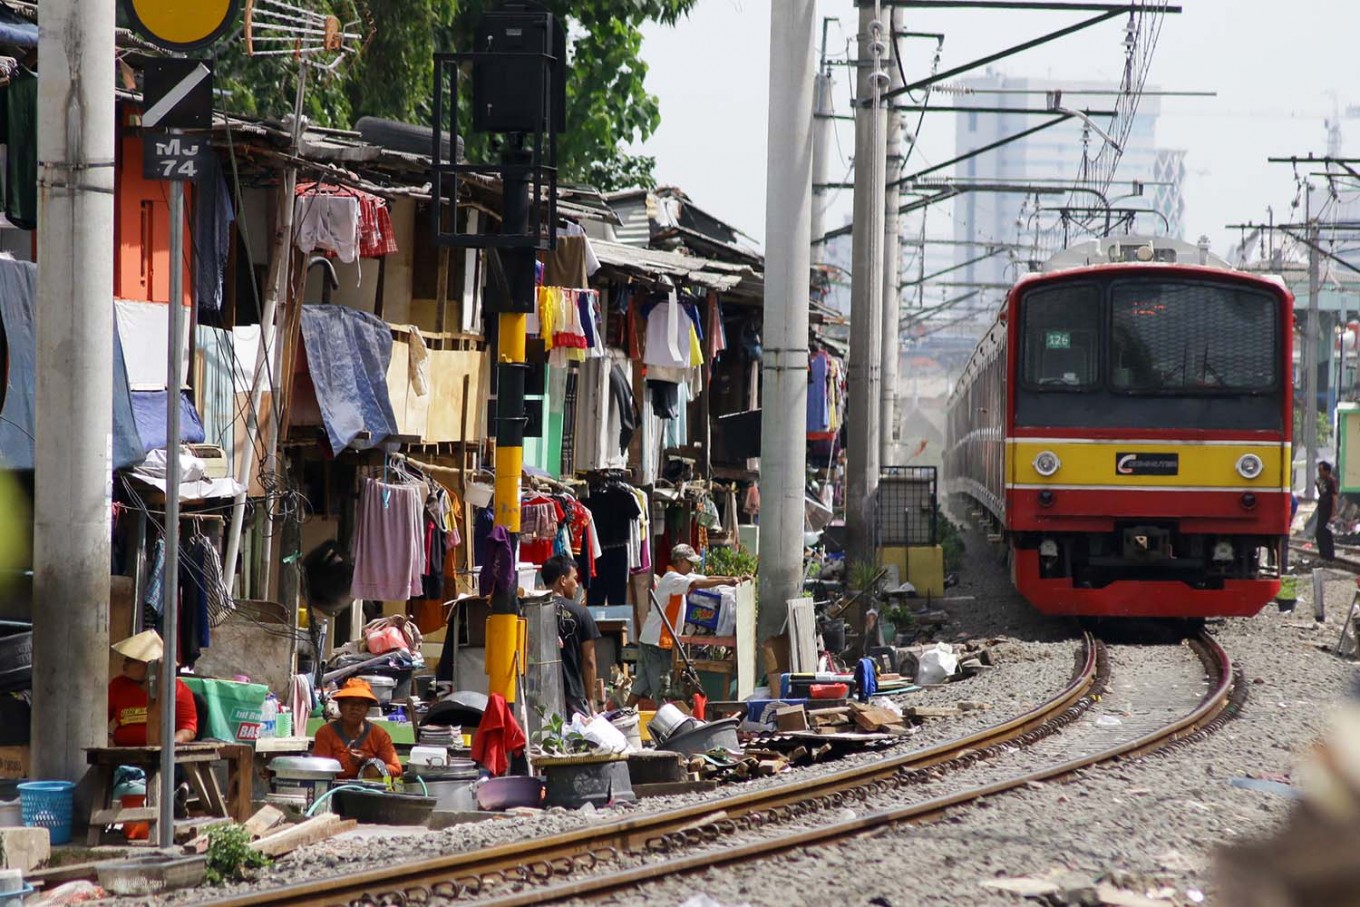 Slums remain a fact of life in Jakarta, ministry finds - City - The